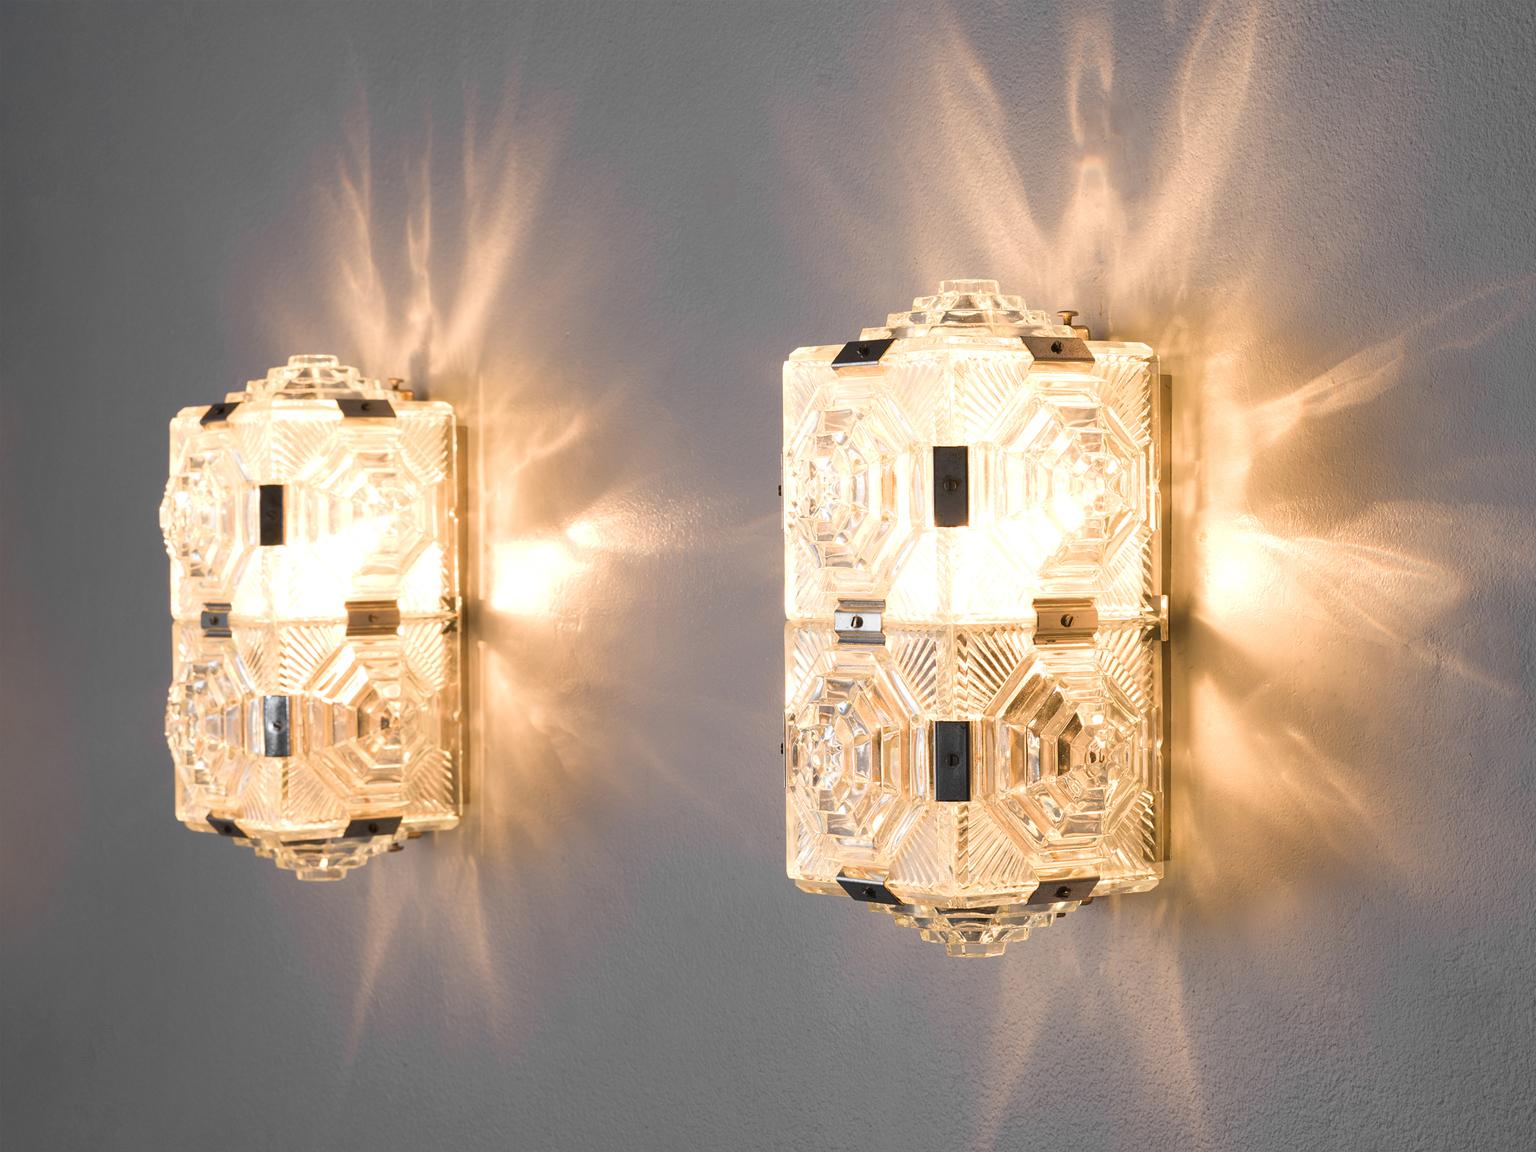 Set of wall lights, brass, structured glass, Europe, 1950s

These stunning wall lights consist out of eight glass parts each that form a rectangular lamp with five sides. Visible brass connections held the design together. Each glass is structured